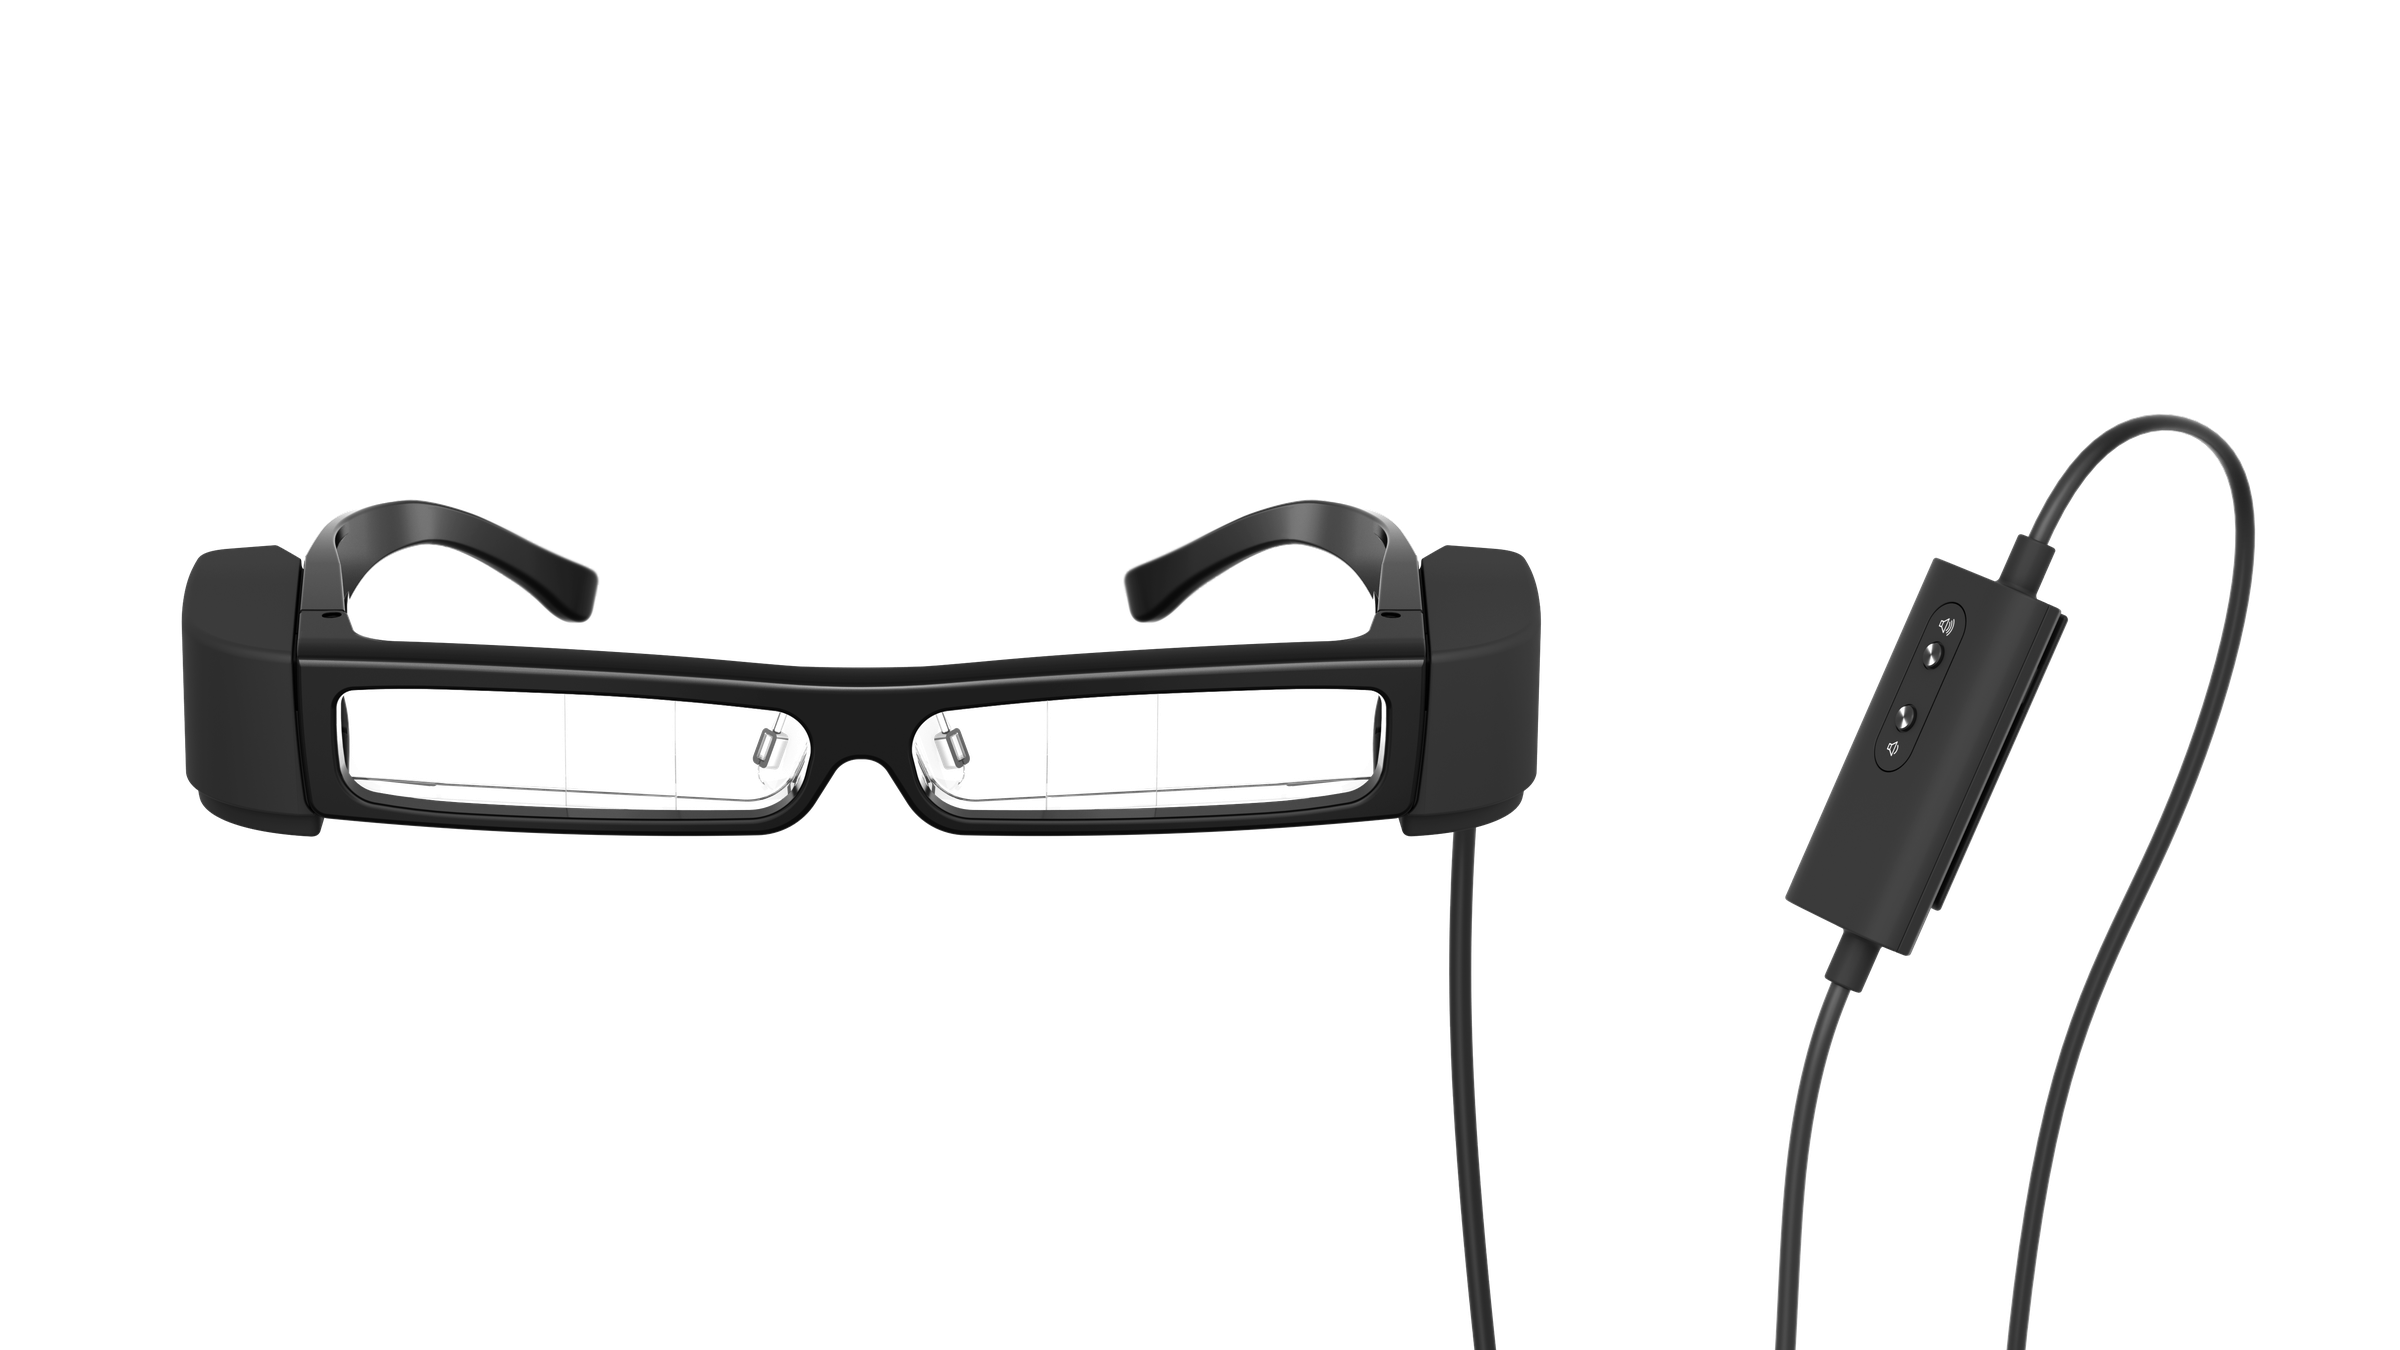 Epson Moverio BT-30C augmented reality glasses